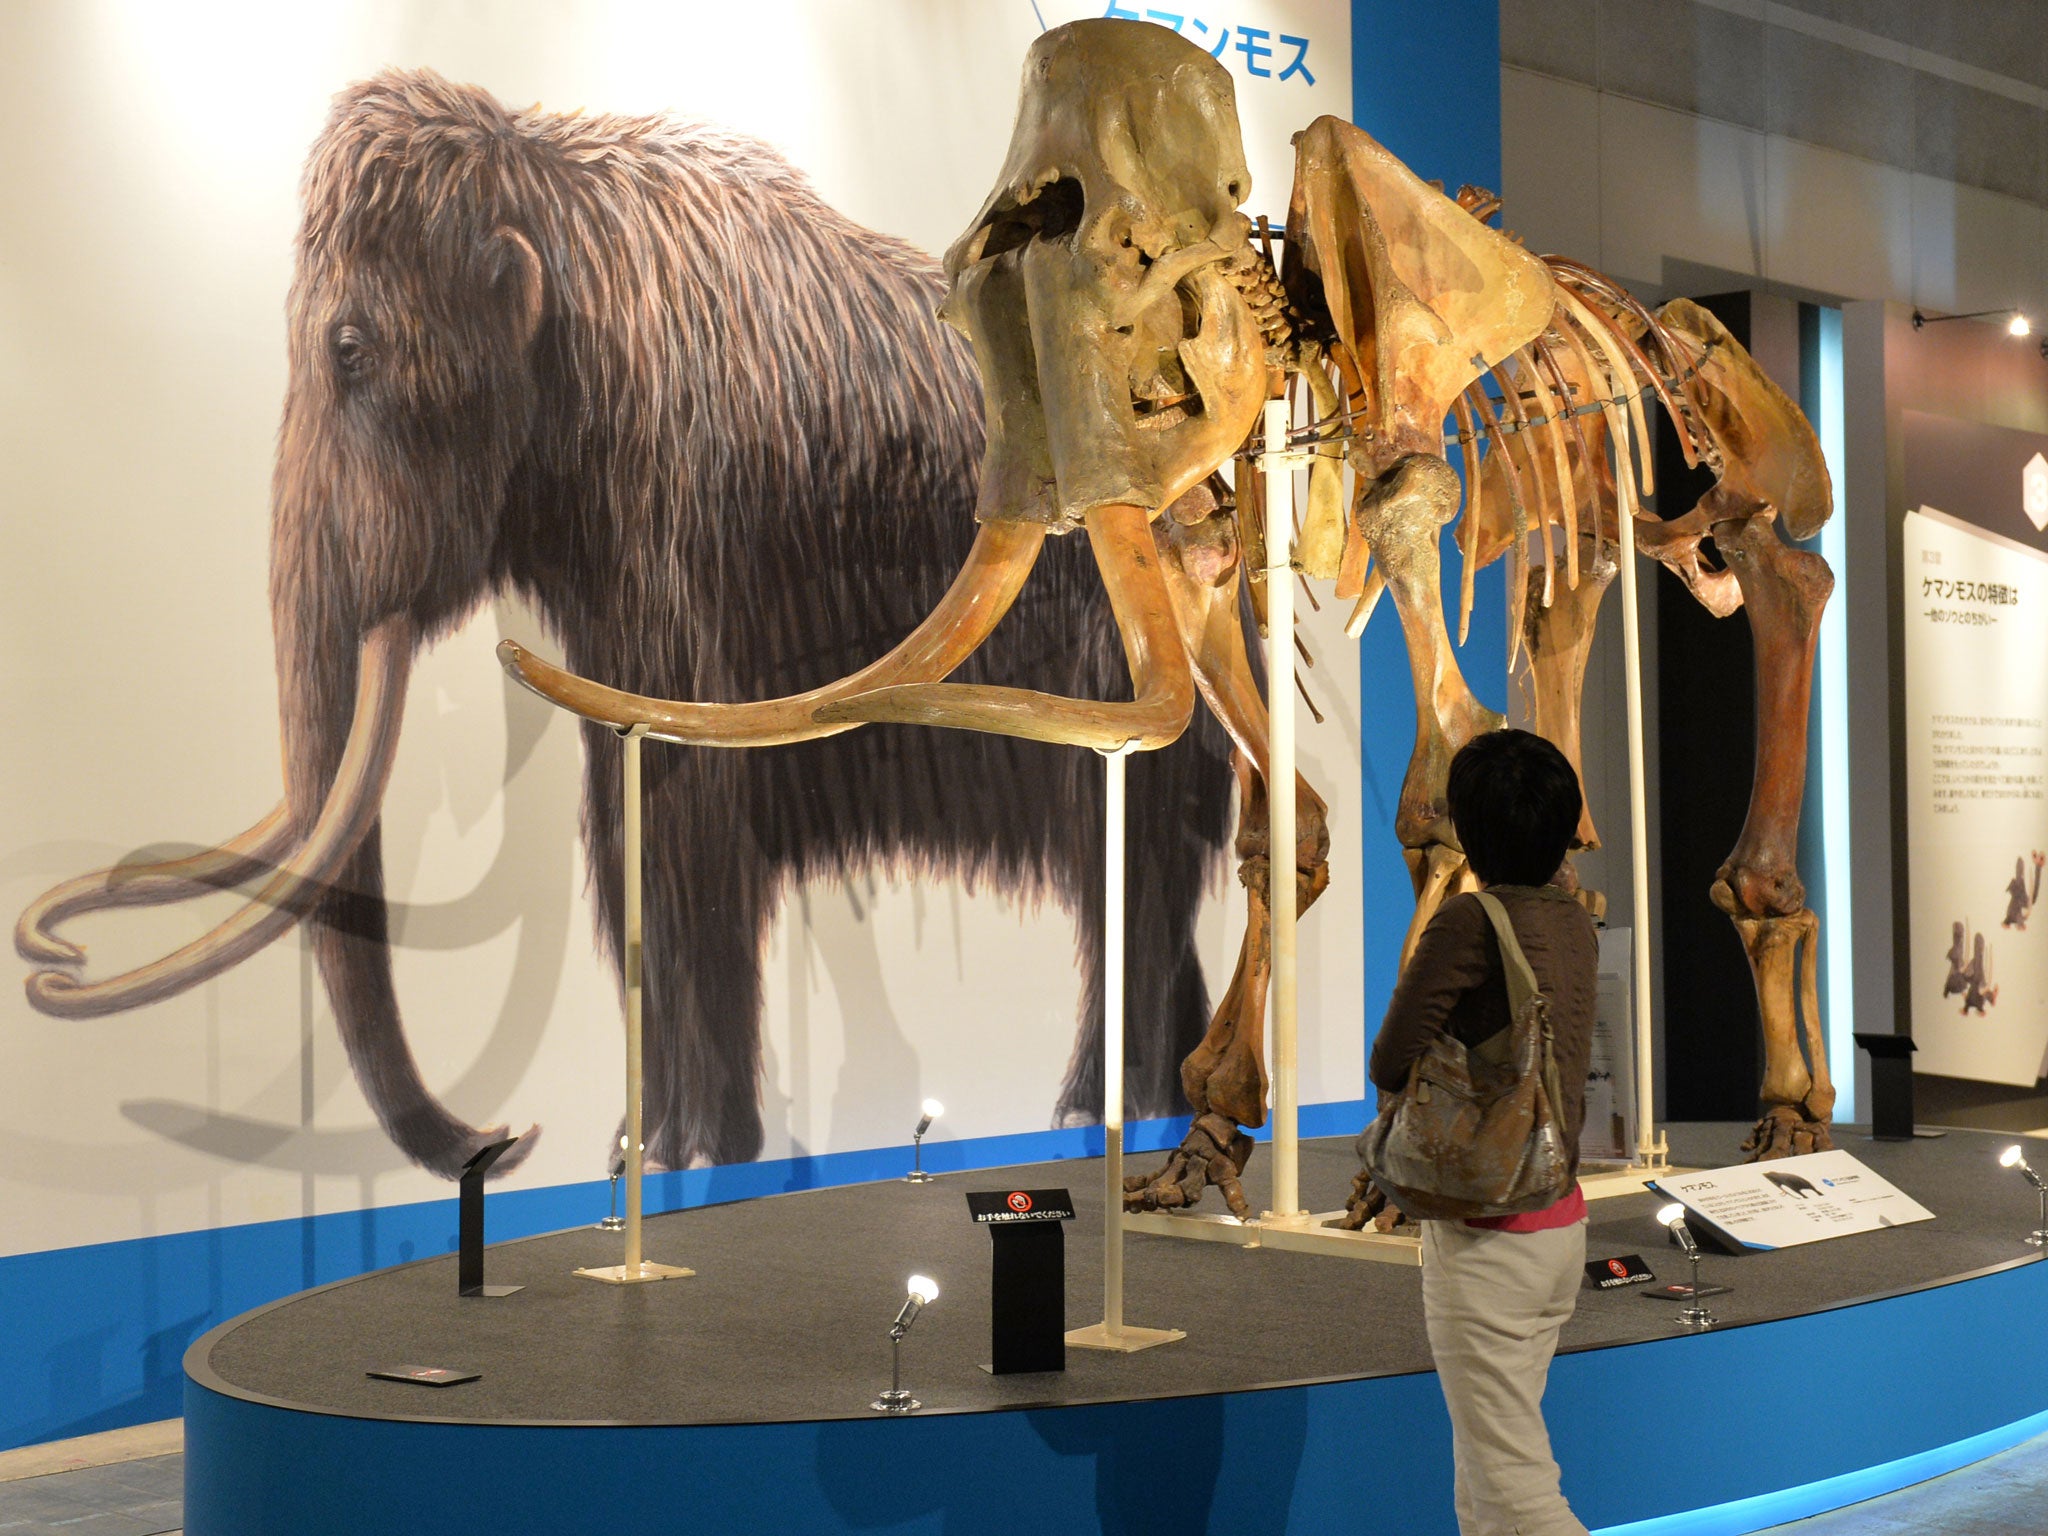 Could the Woolly Mammoth be brought back to life? The Independent